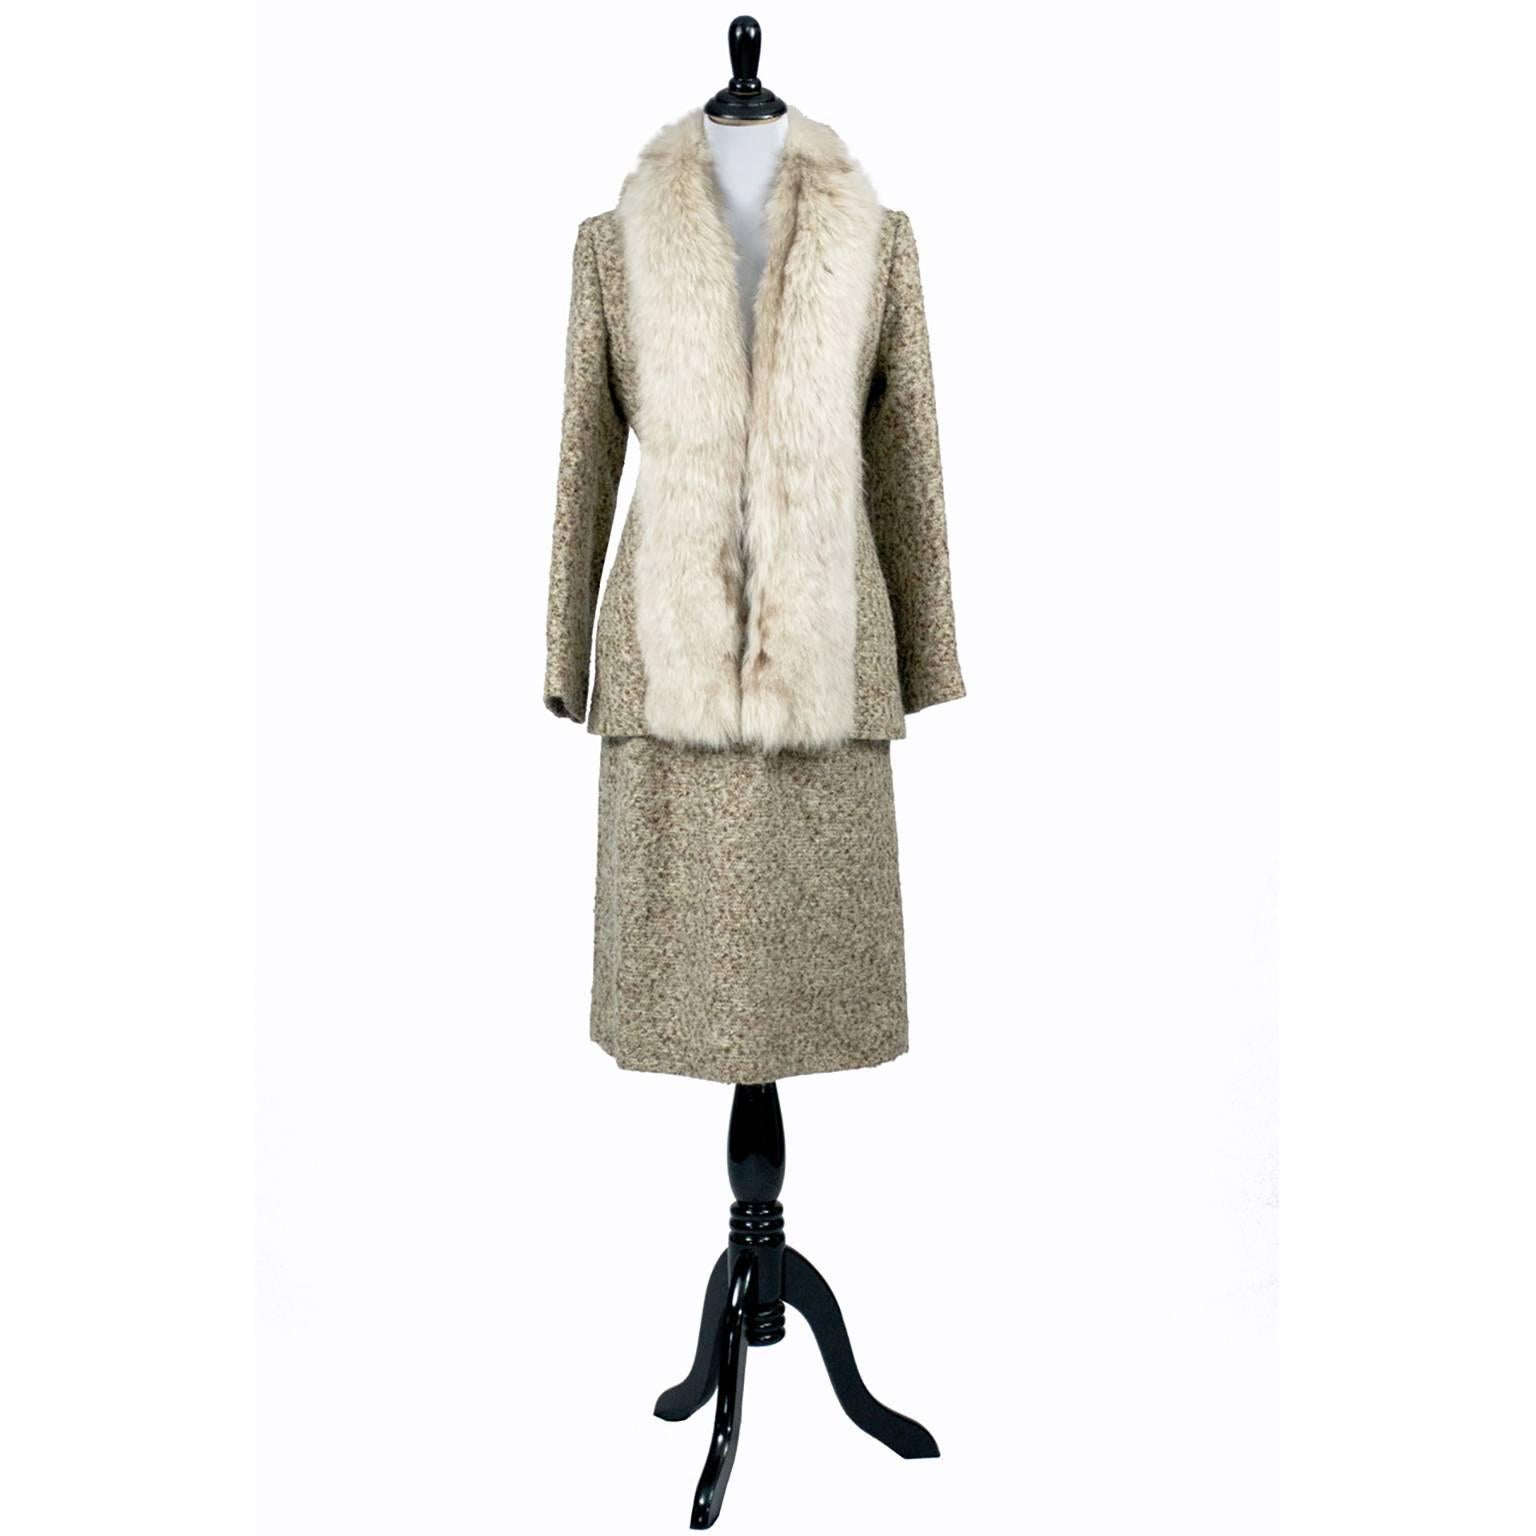 This is a vintage Adolph Schuman for Lilli Ann fox fur trimmed wool tweed 2 piece skirt suit.  This label indicates that this garment is from the late 1960’s or early 1970's.  Adolph Schuman was the person who started Lilli Ann and the company was